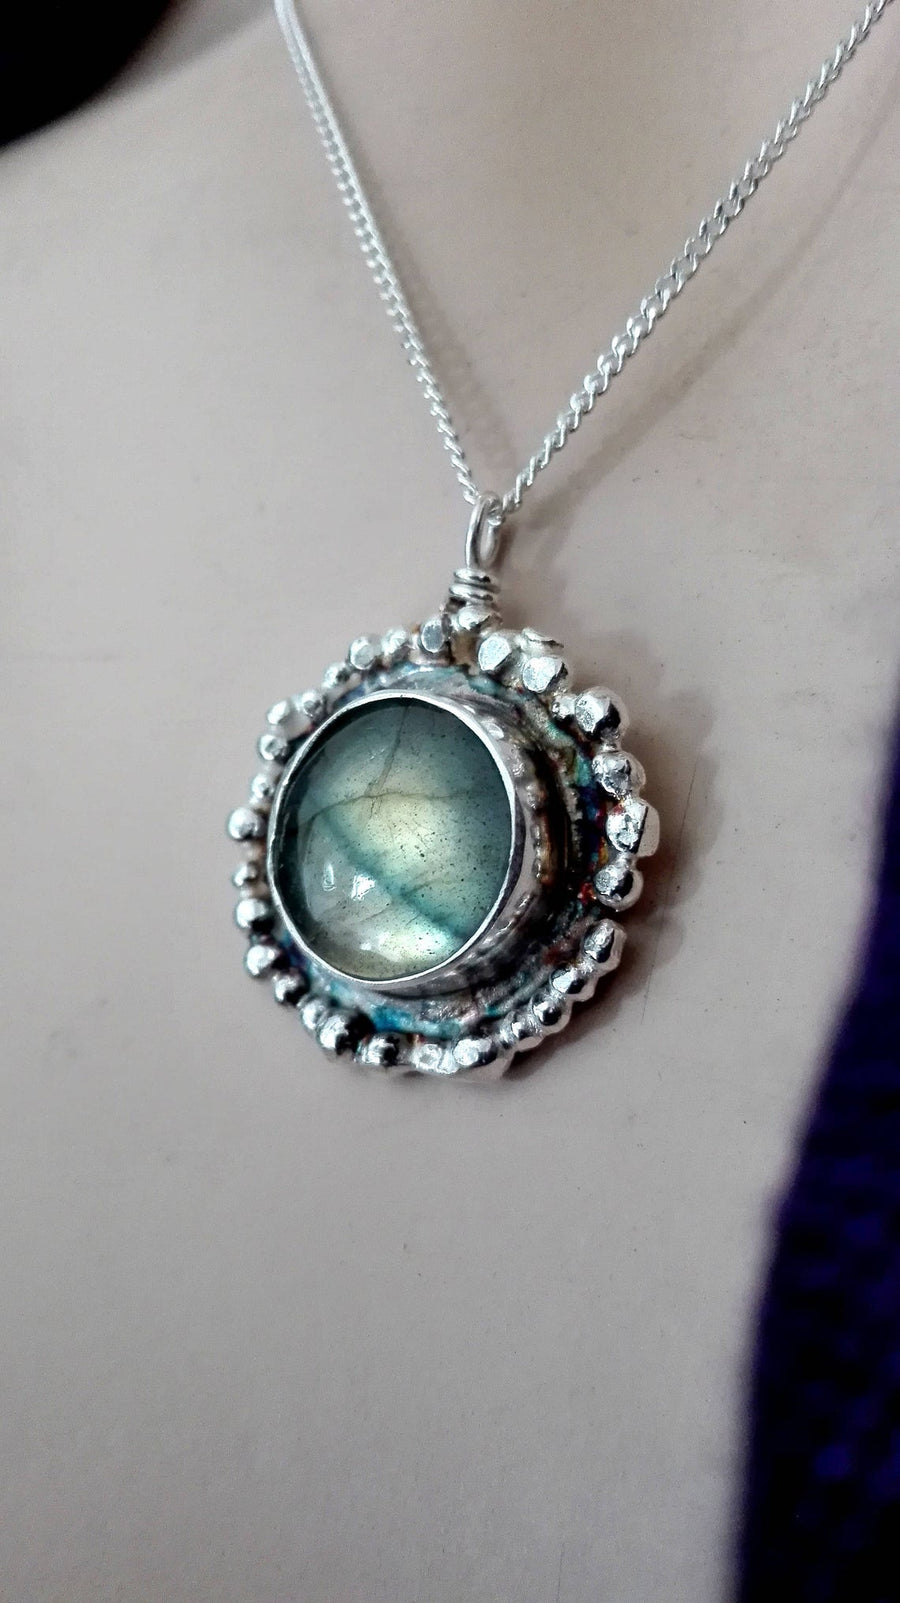 Sterling Chain and Labradorite Pendant Necklace